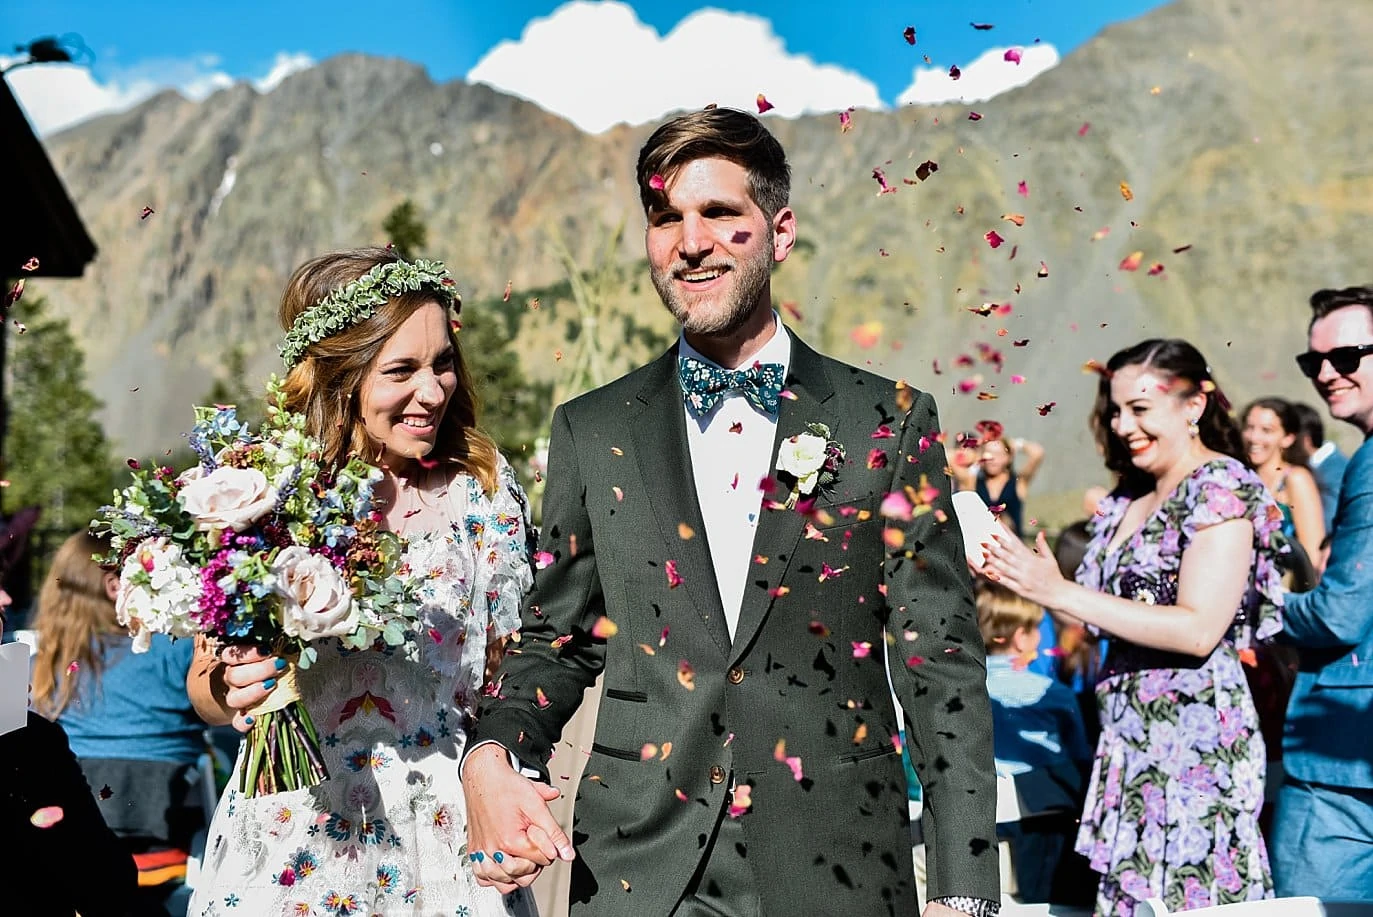 bride and groom leave ceremony in shower of flower petals at Arapahoe Basin wedding by Vail wedding photographer